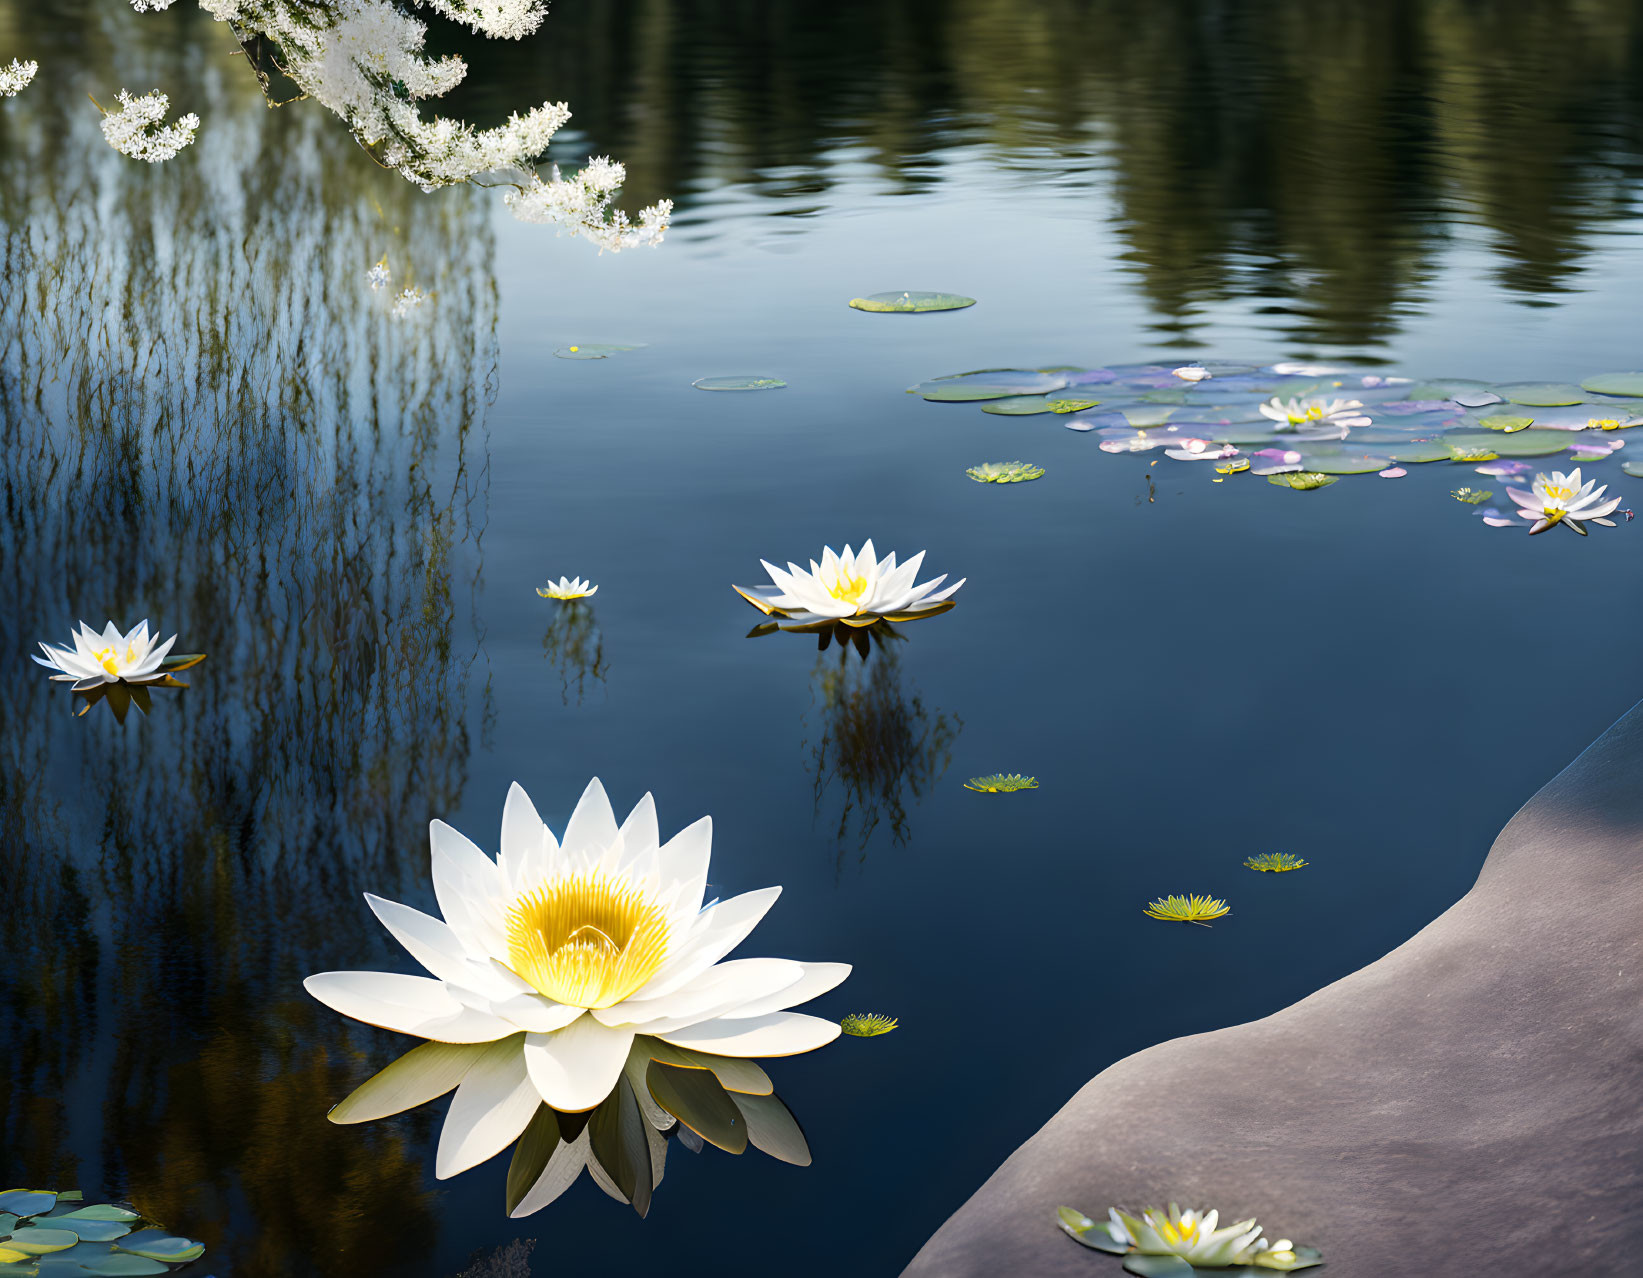 Tranquil pond with white water lilies, lily pads, and blossoms reflected